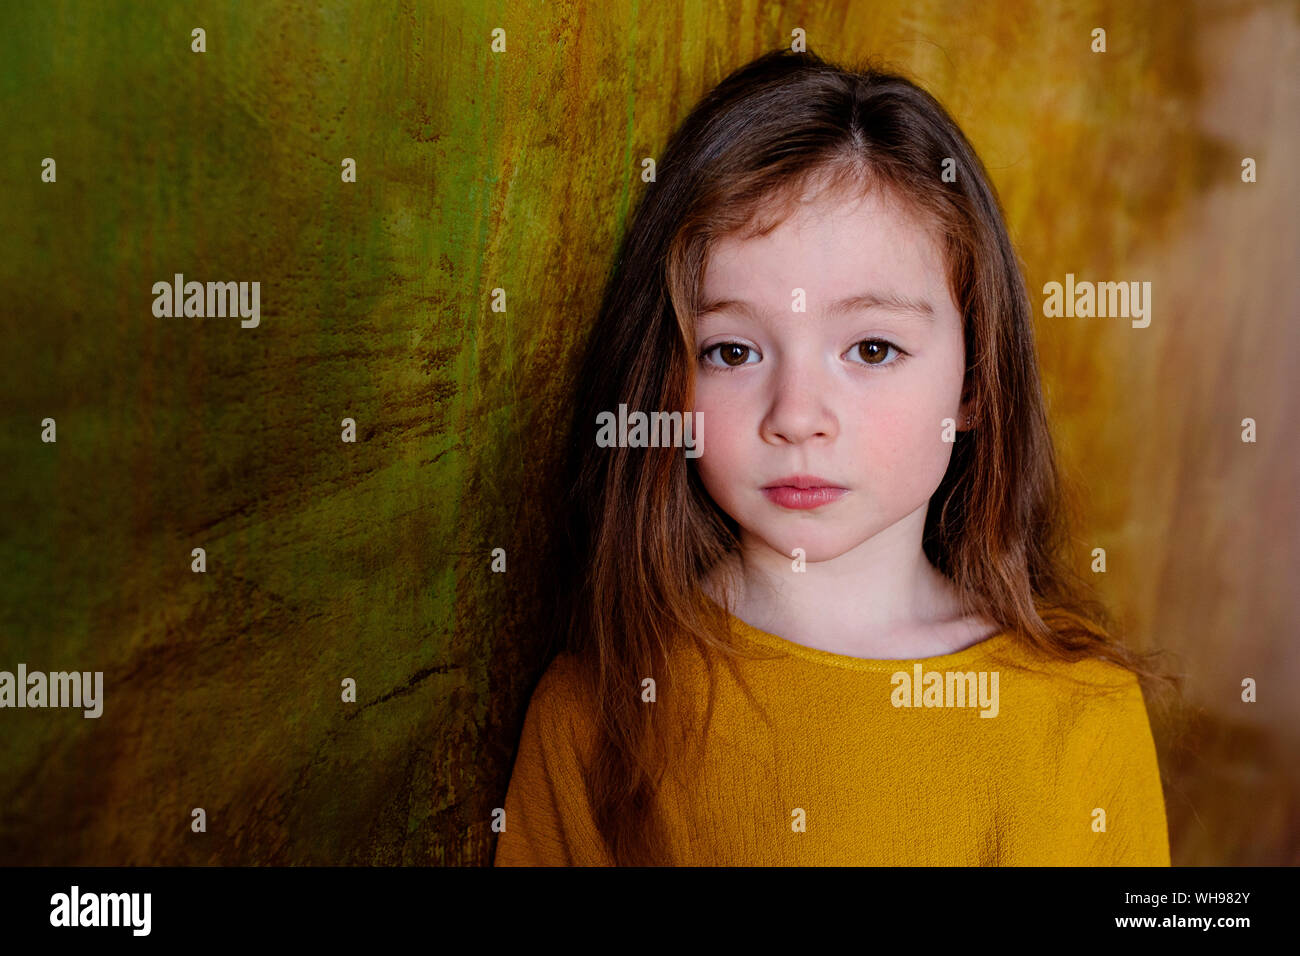 Portrait of little girl with long brown hair Stock Photo